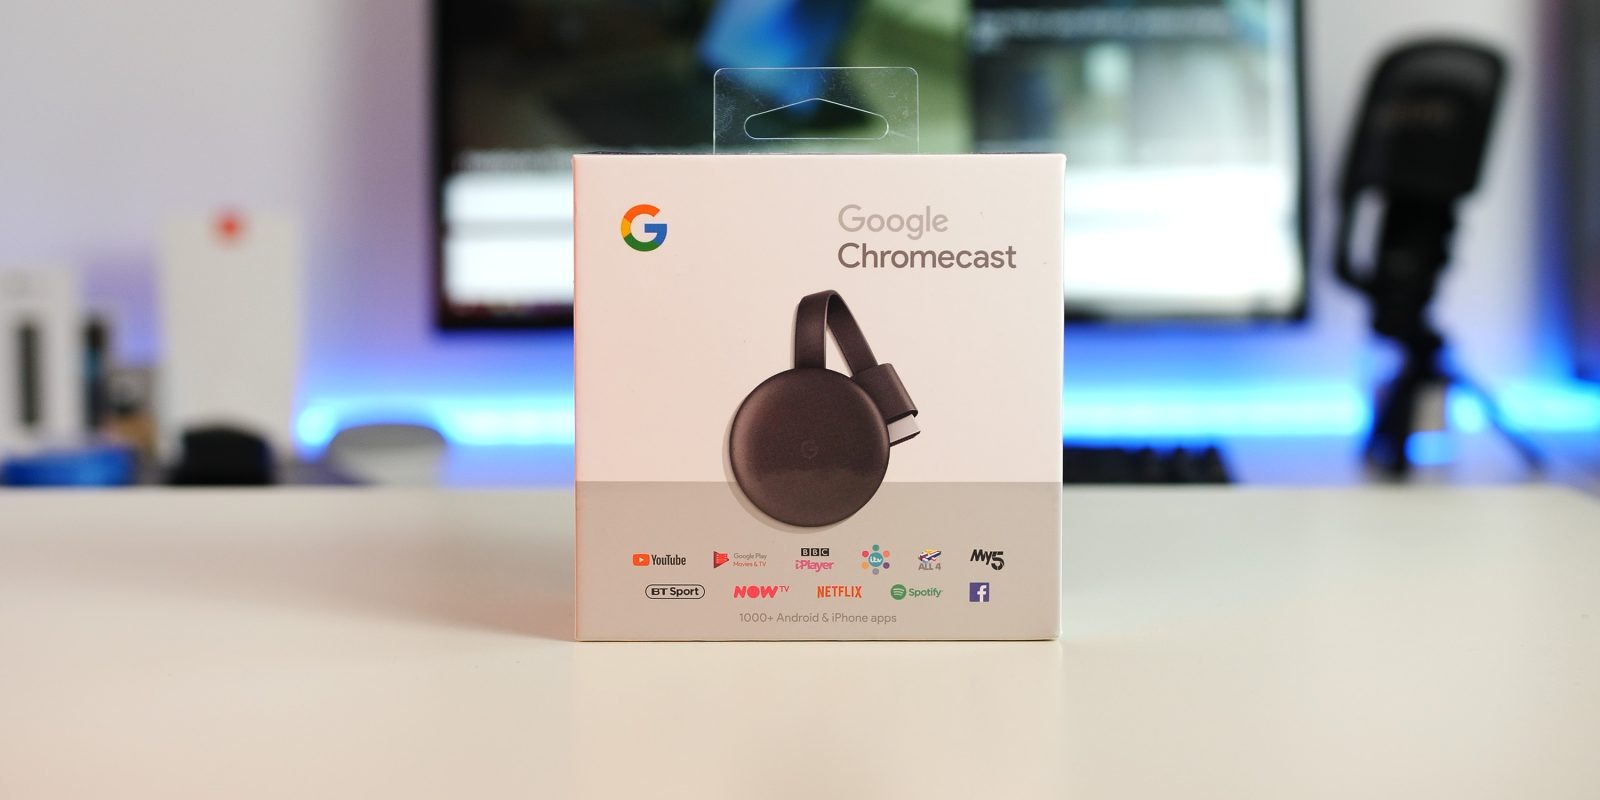 How To Use Google Chromecast On Android And IOS